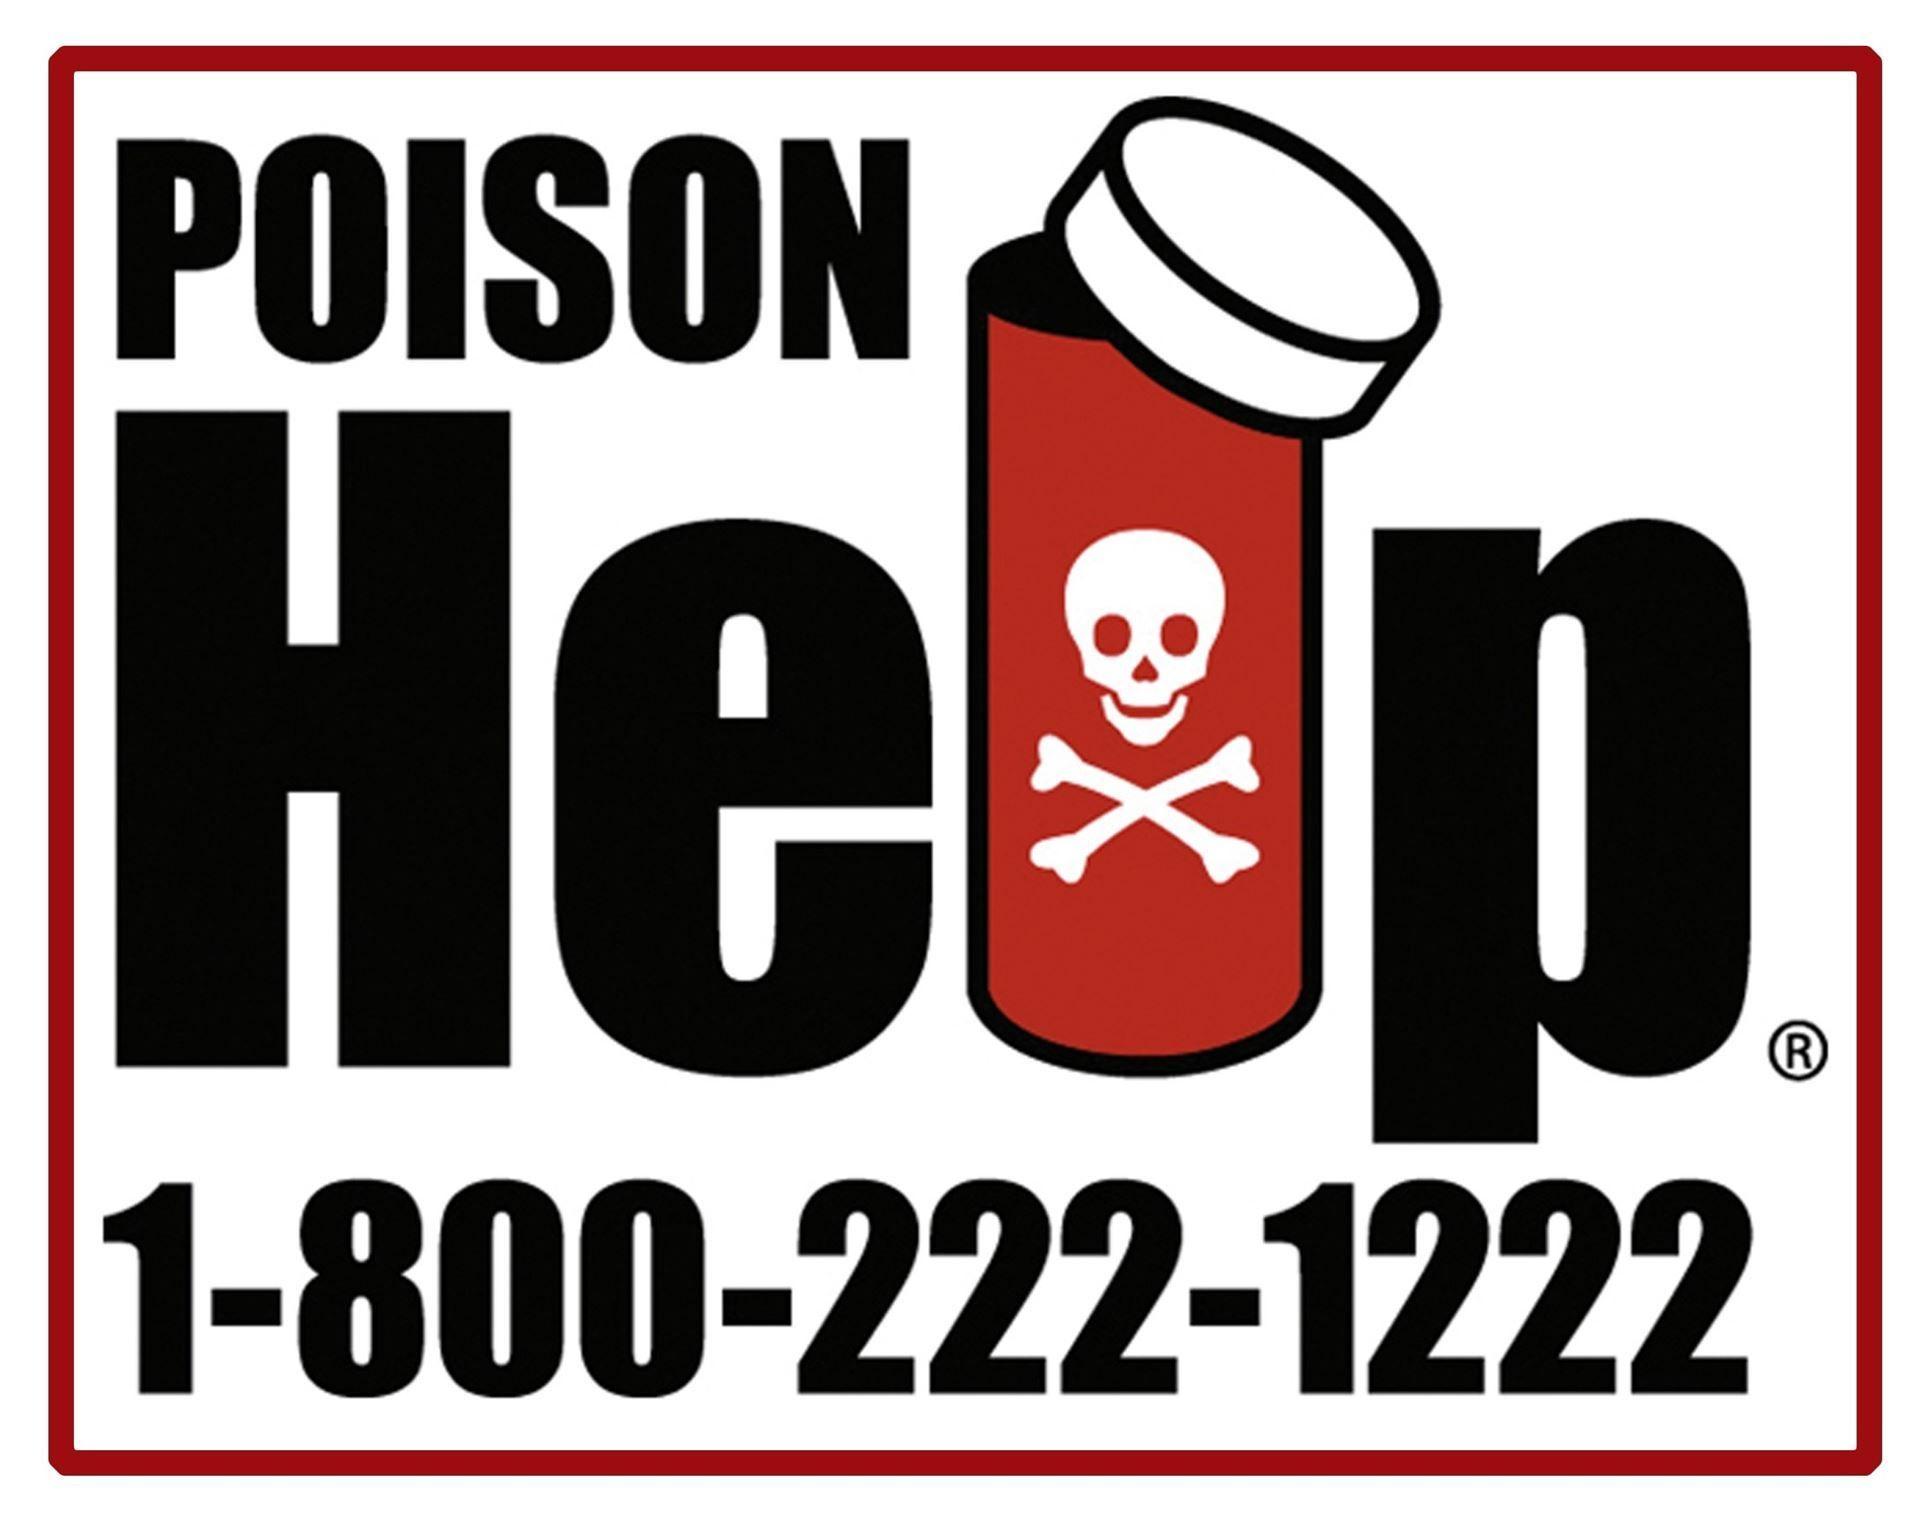 Red Help Logo - American Association of Poison Control Centers (AAPCC) Help